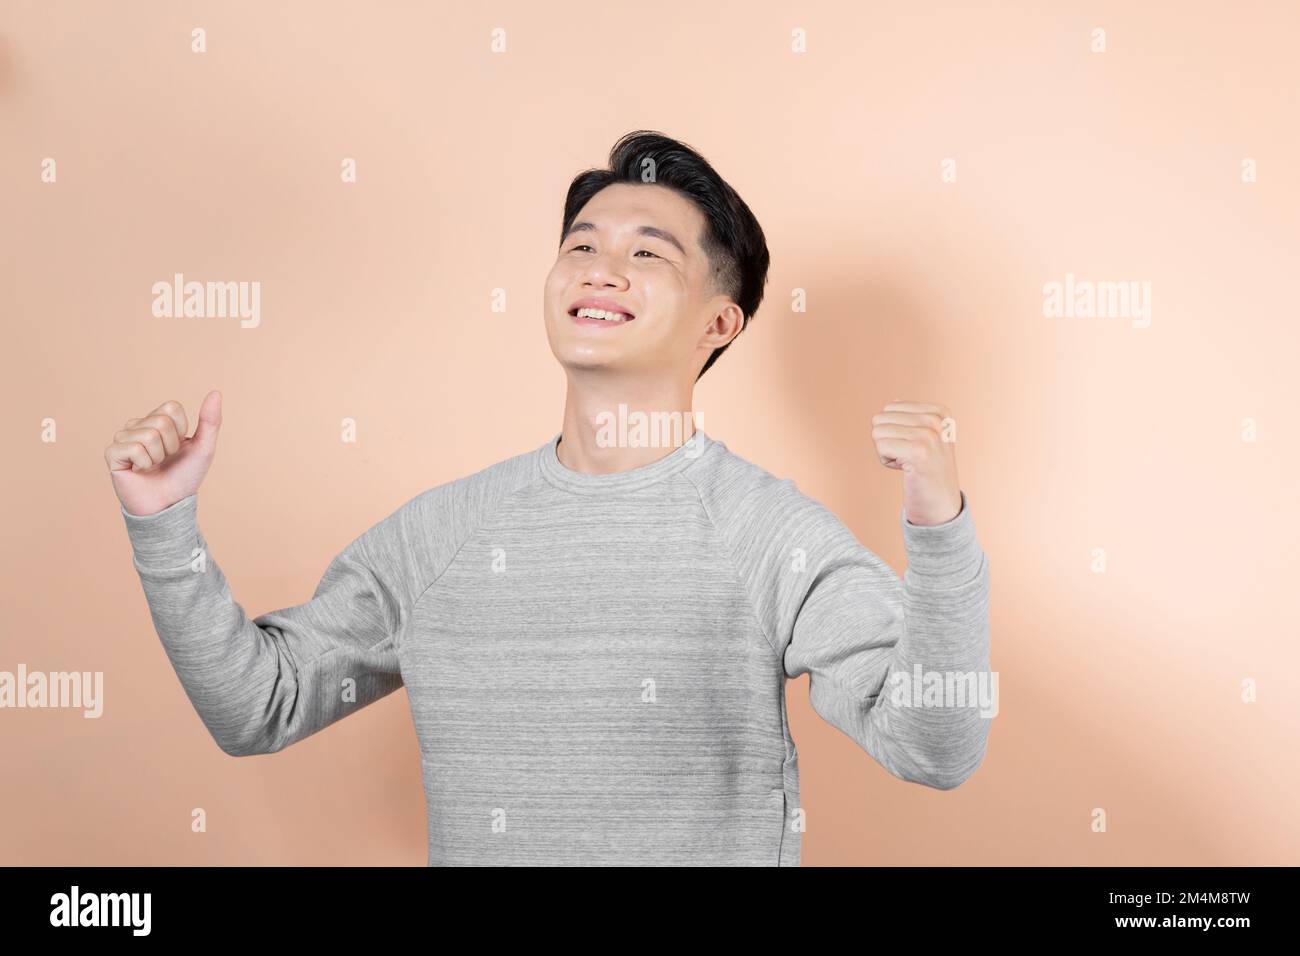 Excited young Asian man celebrating success with raised fist isolated on beige background. Stock Photo